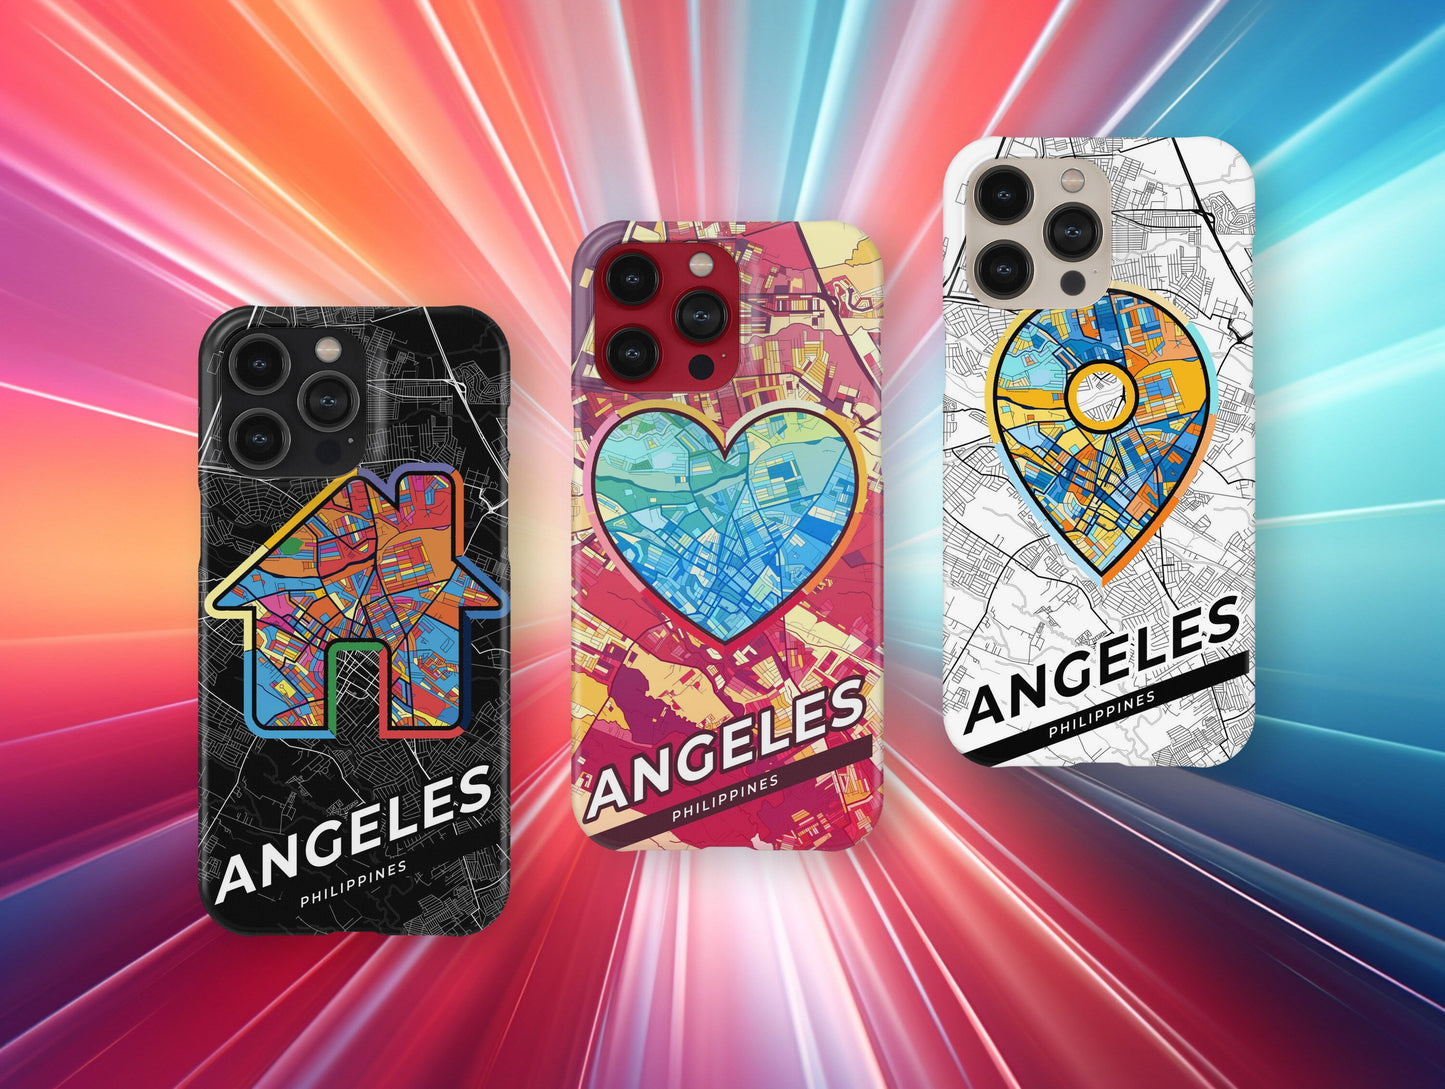 Angeles Philippines slim phone case with colorful icon. Birthday, wedding or housewarming gift. Couple match cases.